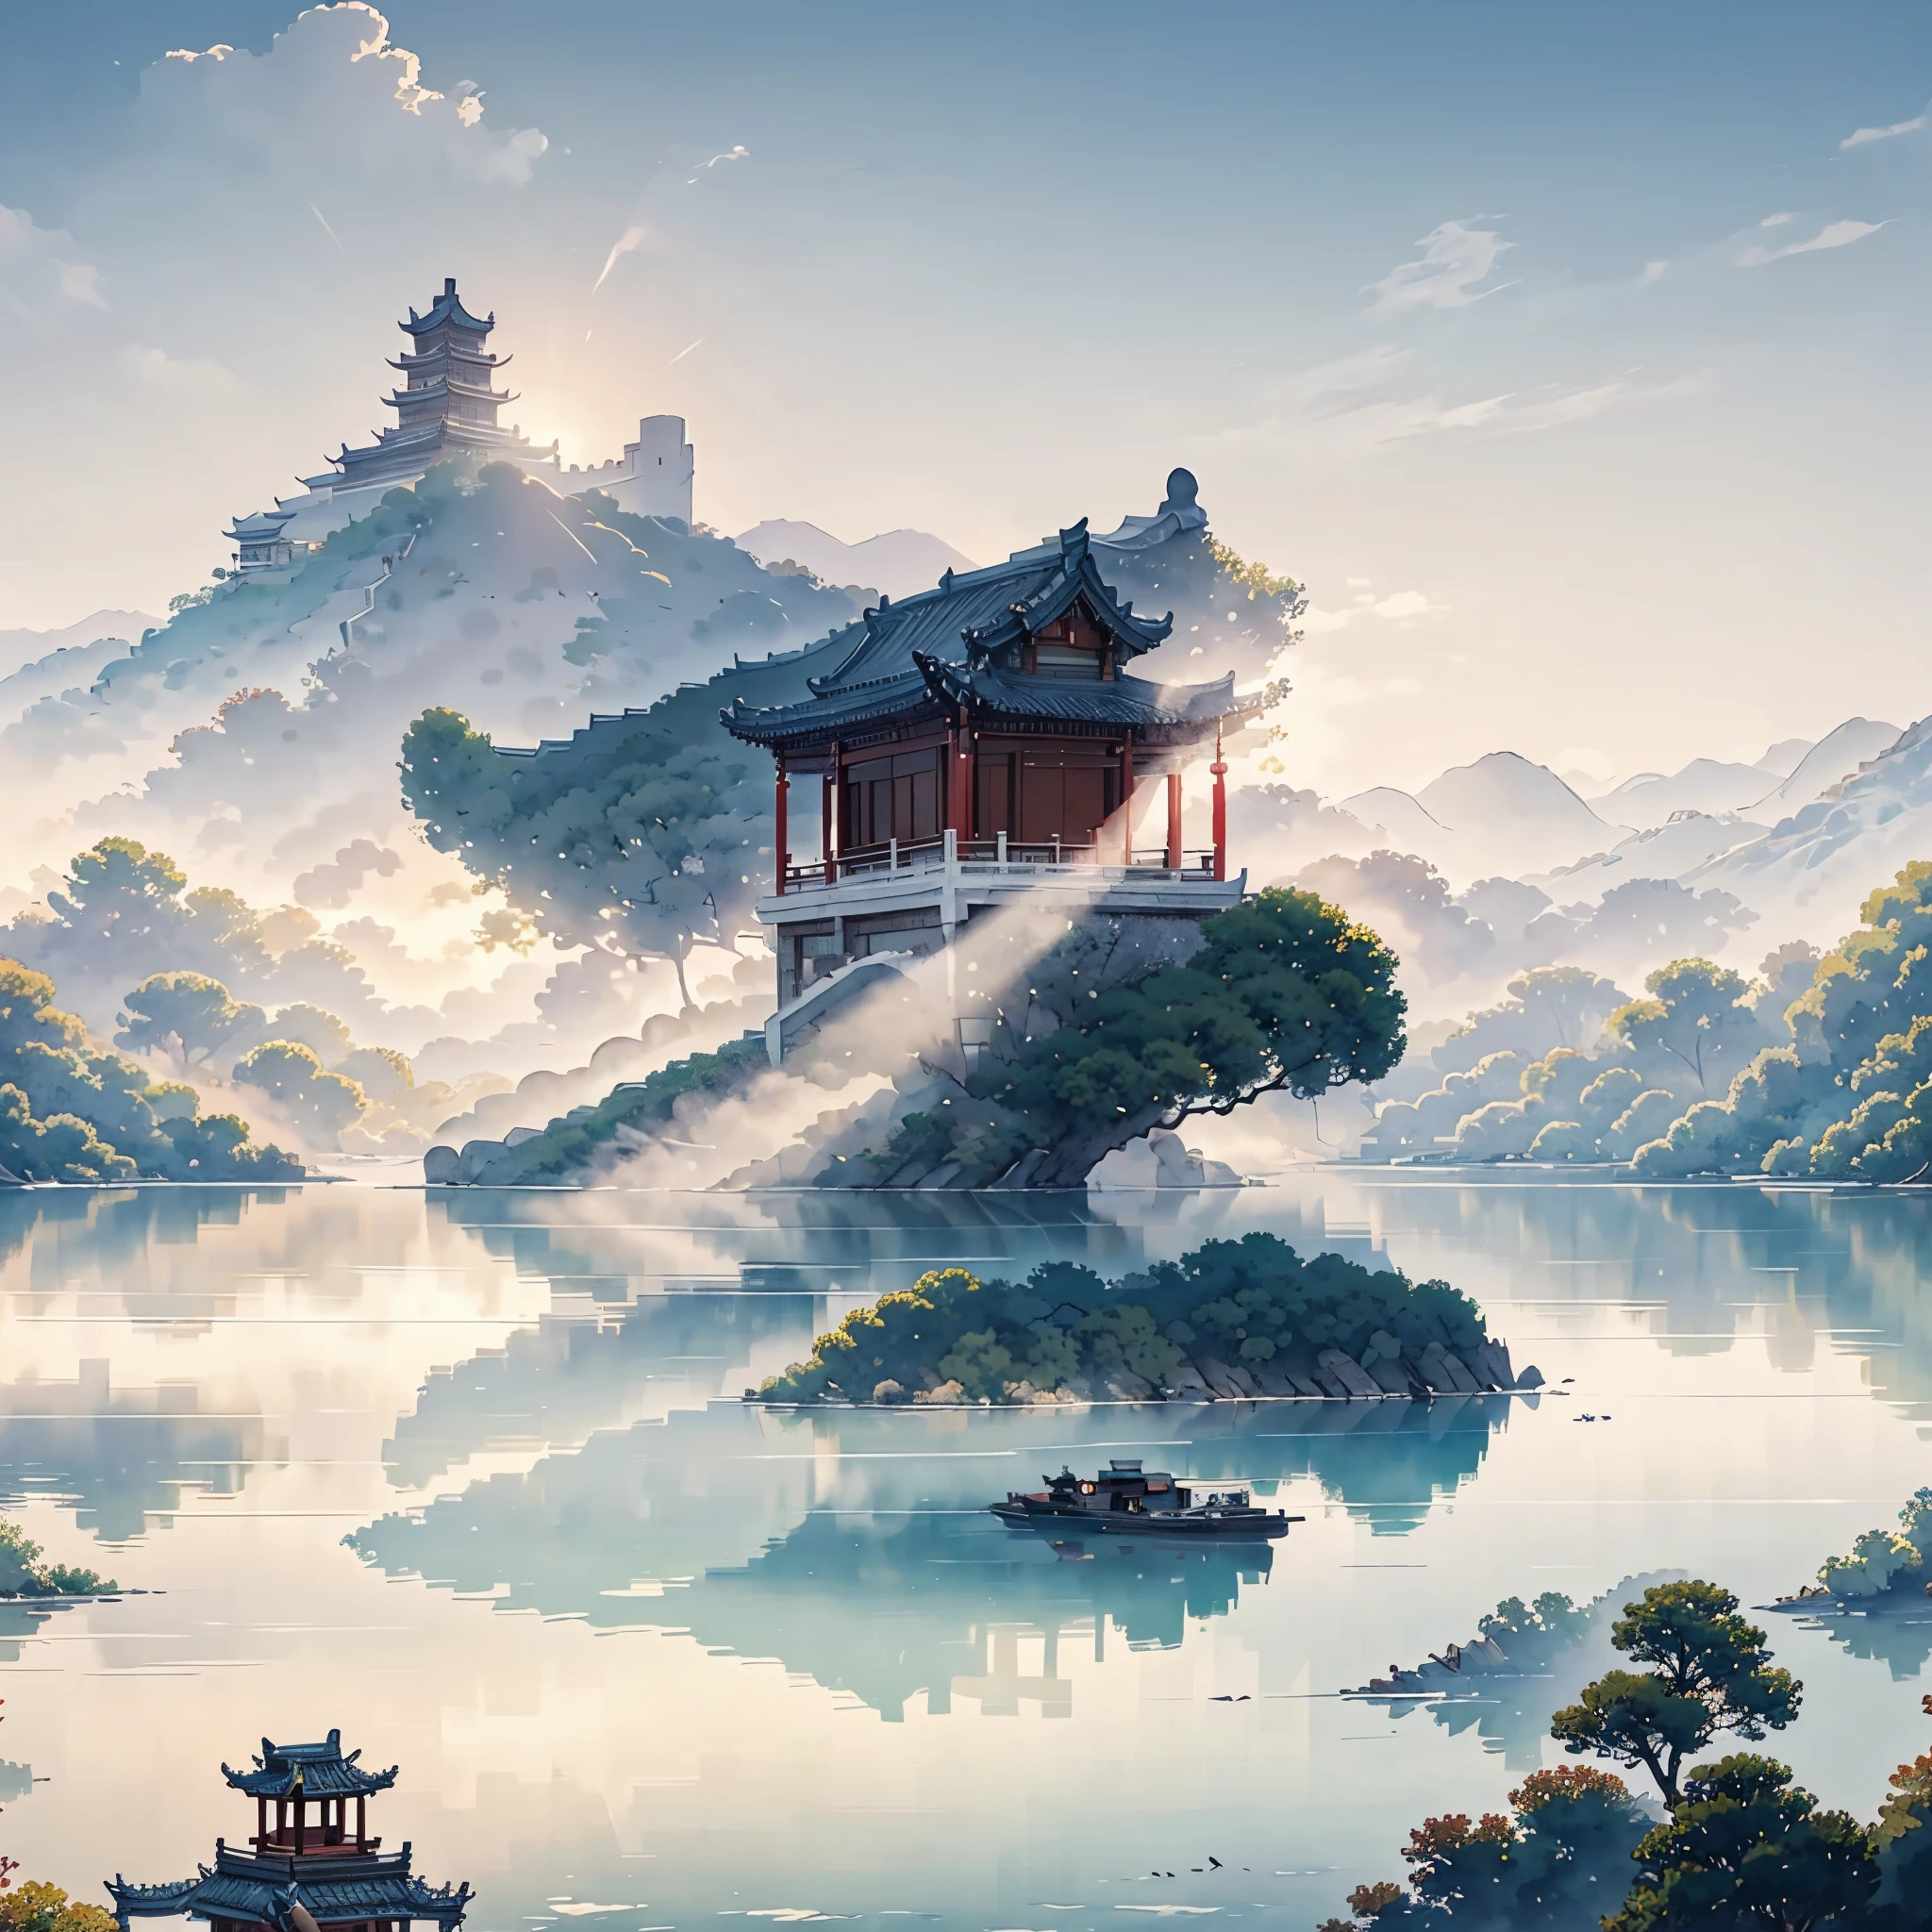 (Depth  of  field  effect)  (Chinese  ancient  architecture  group  on  isolated  island),  (Tower,  Building)  (Pavilion,  miscellaneous  trees,  Clouds,  green  trees,  maple  trees,  red  trees,  small  stones,  small  birds),  Chinese  watercolor  style,  (Chinese  painting  style),  Chinese  landscapes,  Traditional  Chinese  watercolor  paintings,  Chinese  paintings,  watercolor  8K,  (reflections),  clear  boundaries  between  light  and  shadow,  light  and  shadow,  light  and  shadow  effect,  masterpiece,  super  details,  epic  work,  ultra  high  definition,  high  quality,  very  detailed,  official  art,  unified  8K  wallpaper,  super  details，Contrast between light and dark.